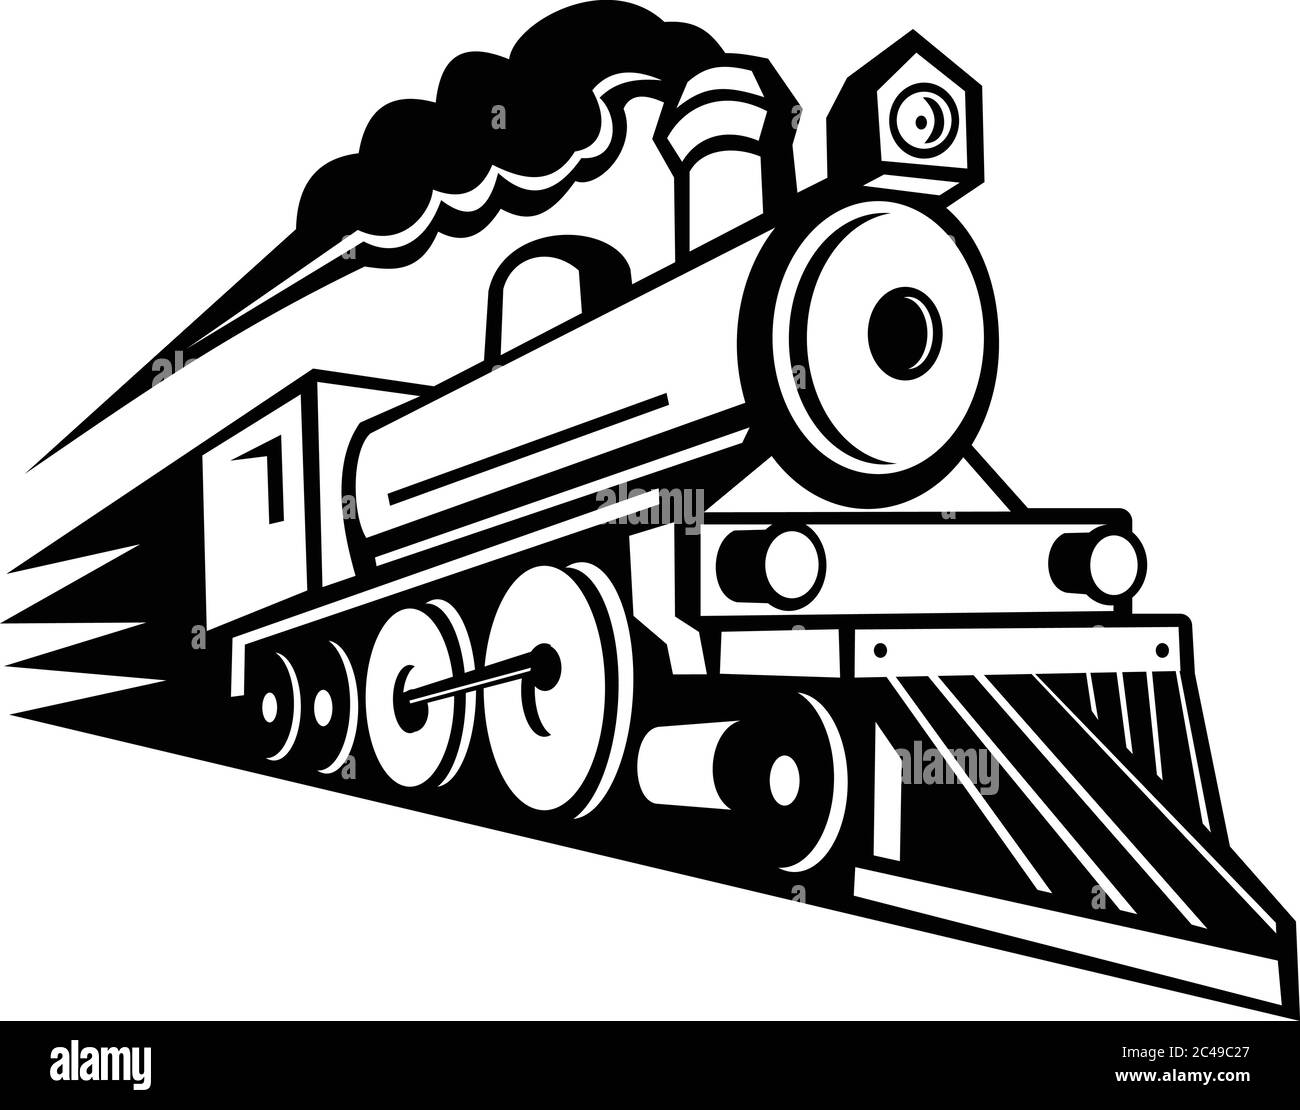 Speeding train Cut Out Stock Images & Pictures - Alamy